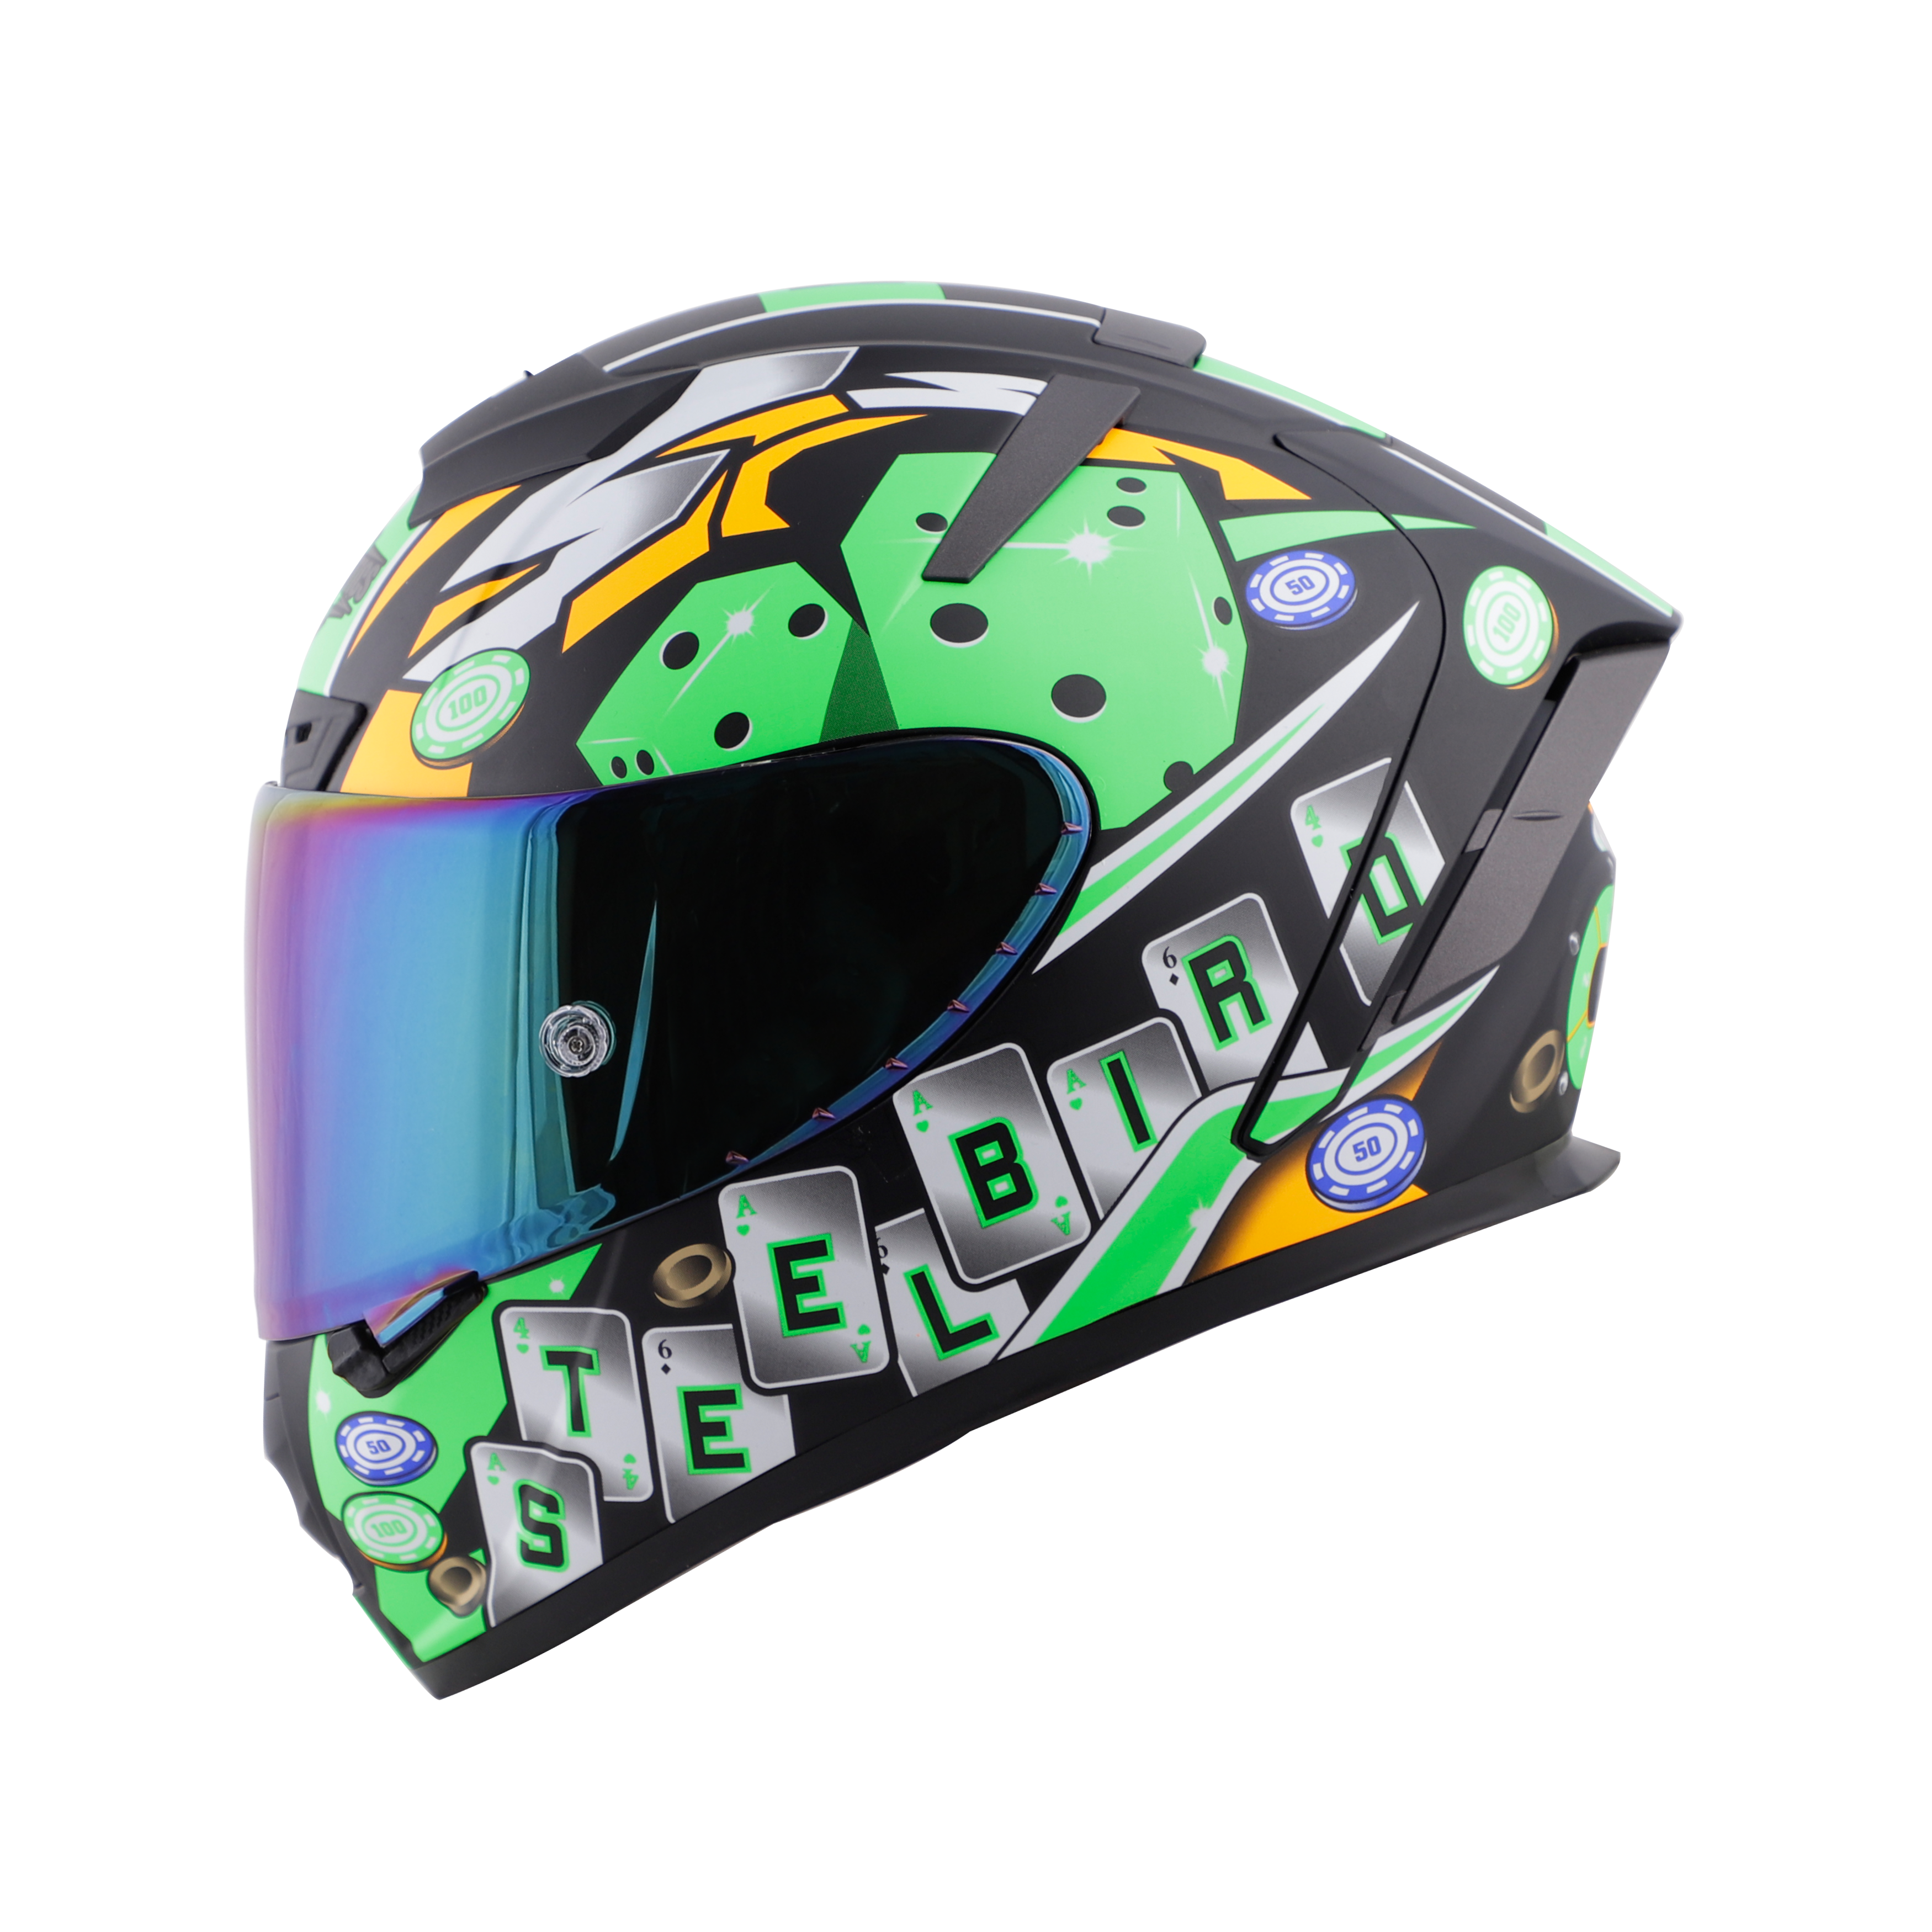 SA-2 CASINO MAT BLACK WITH GREEN ( FITTED WITH CLEAR VISOR EXTRA RAINBOW CHROME VISOR FREE WITH ANTI-FOG SHIELD HOLDER)